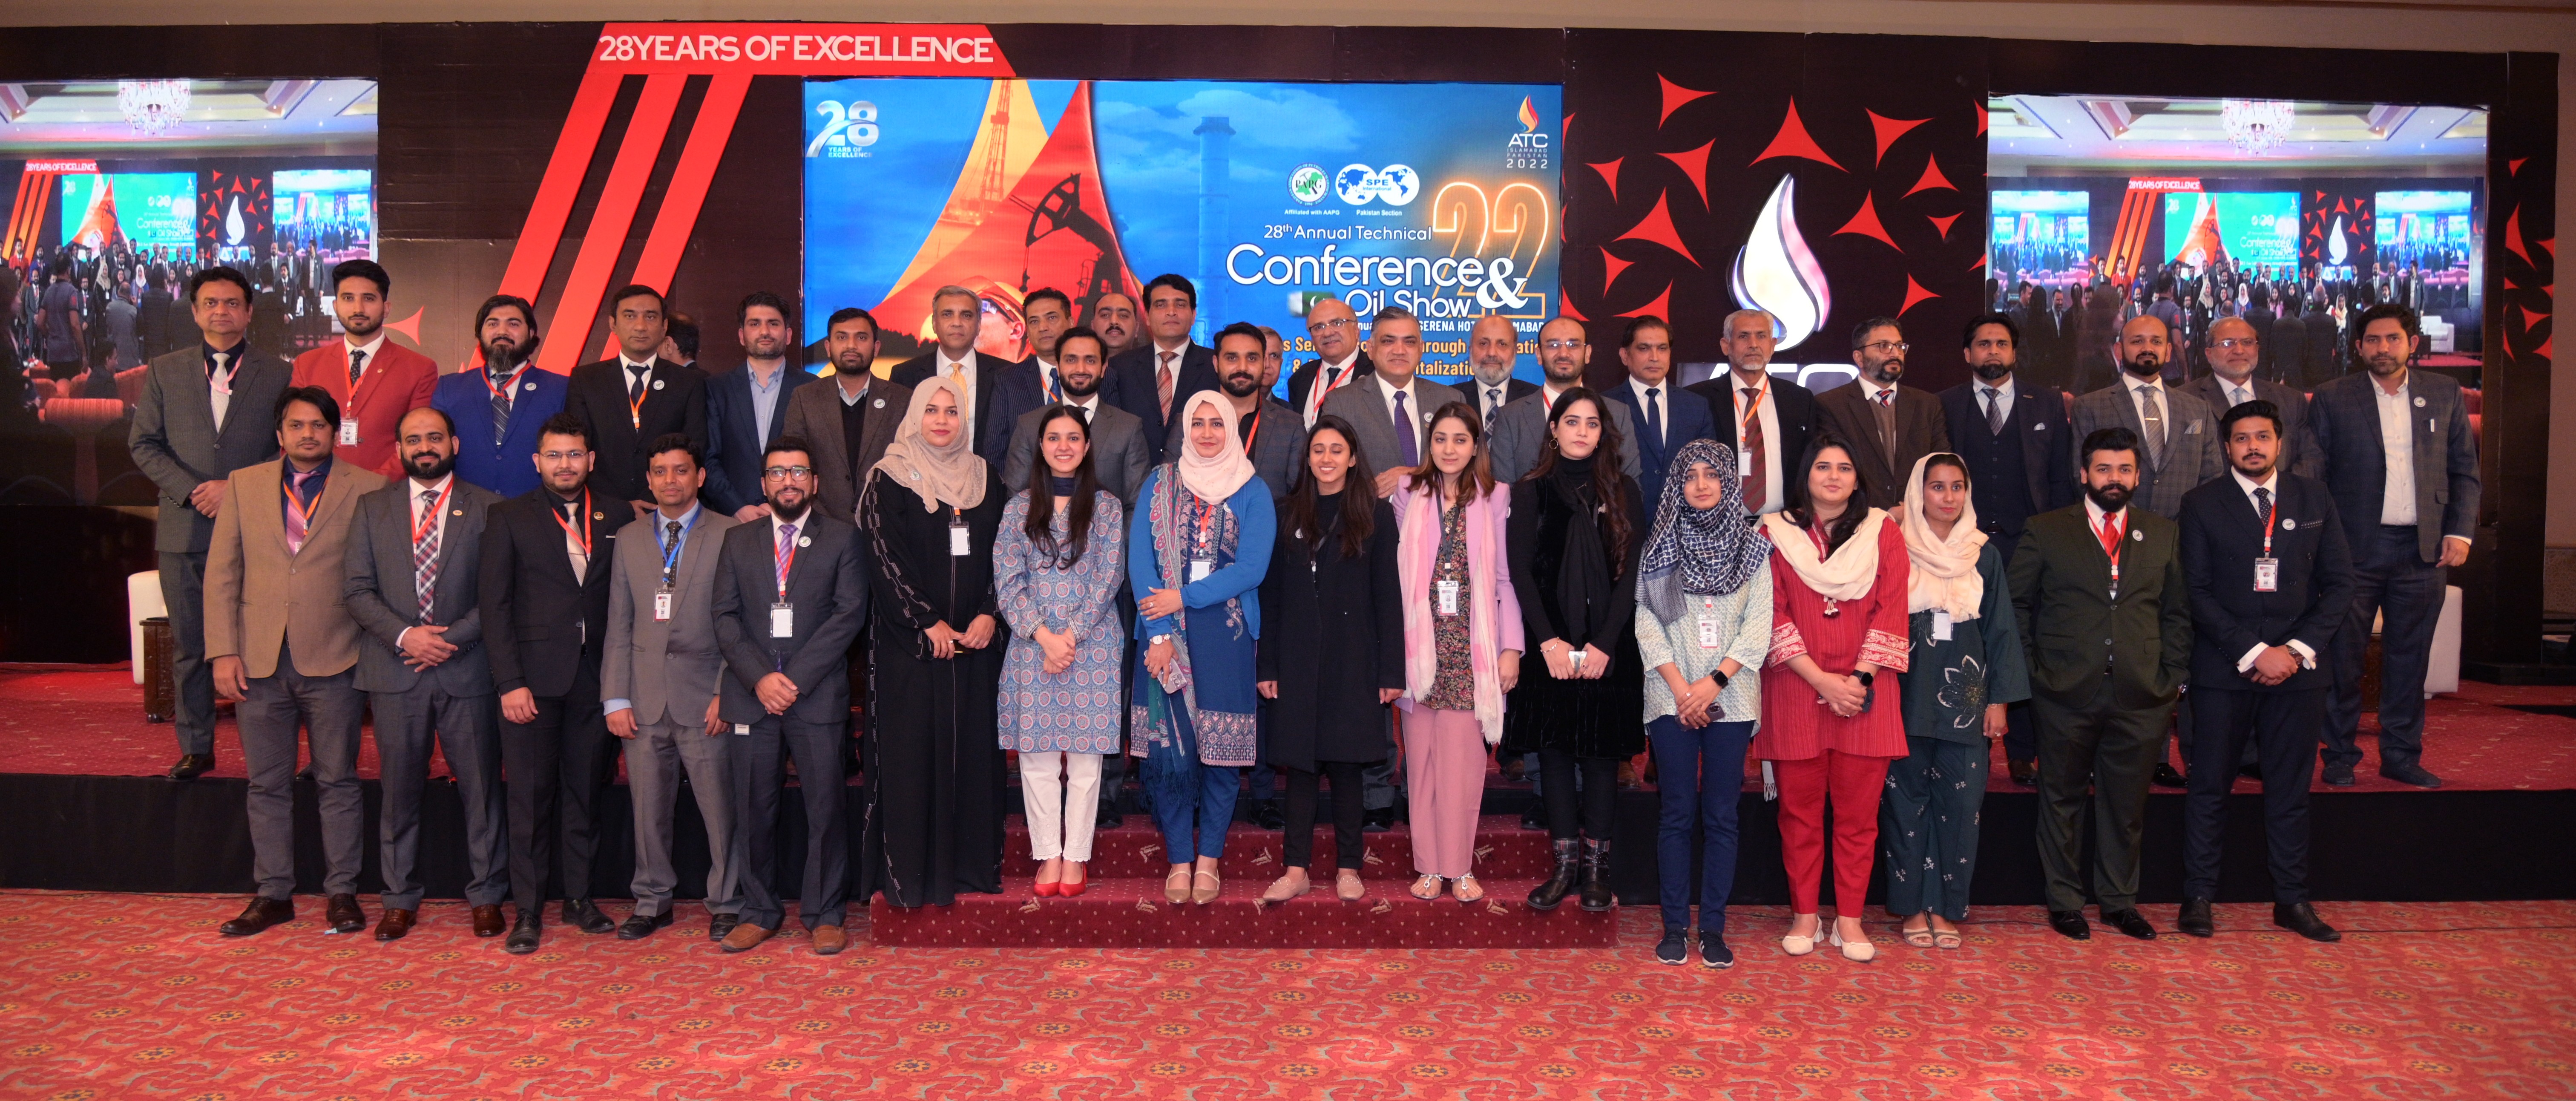 The group photo of all the members and participants of oil show conference with the chief guests